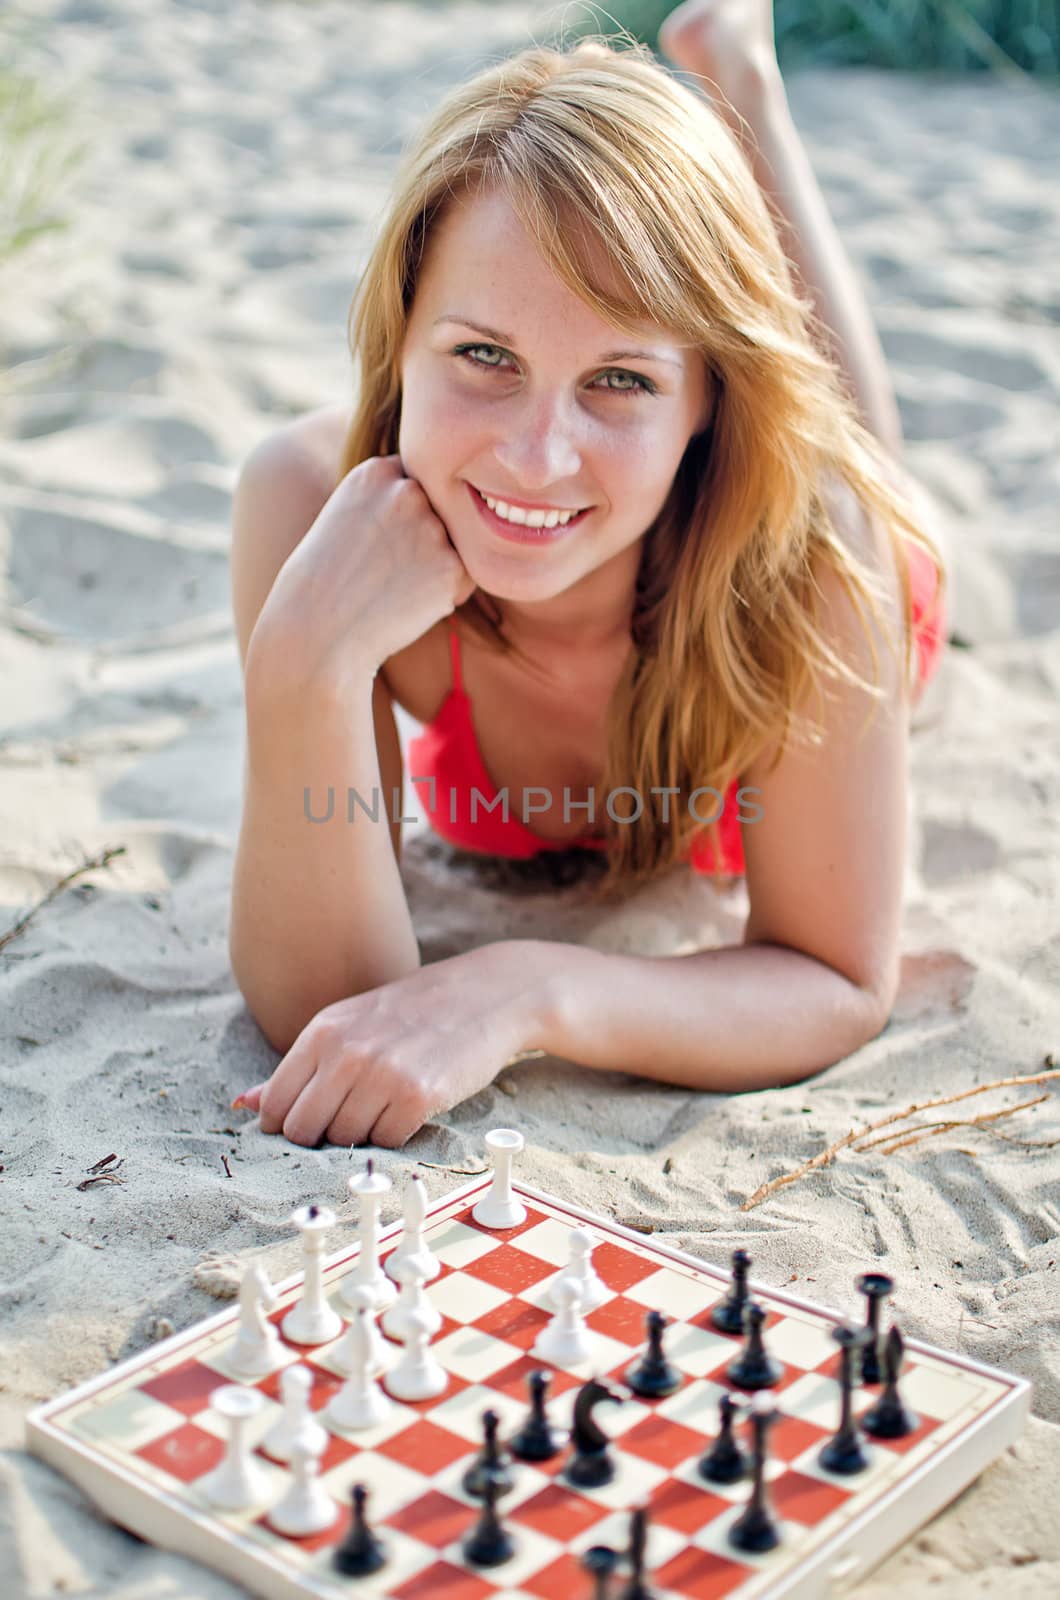 Portrait of pretty woman playing chess on the beach